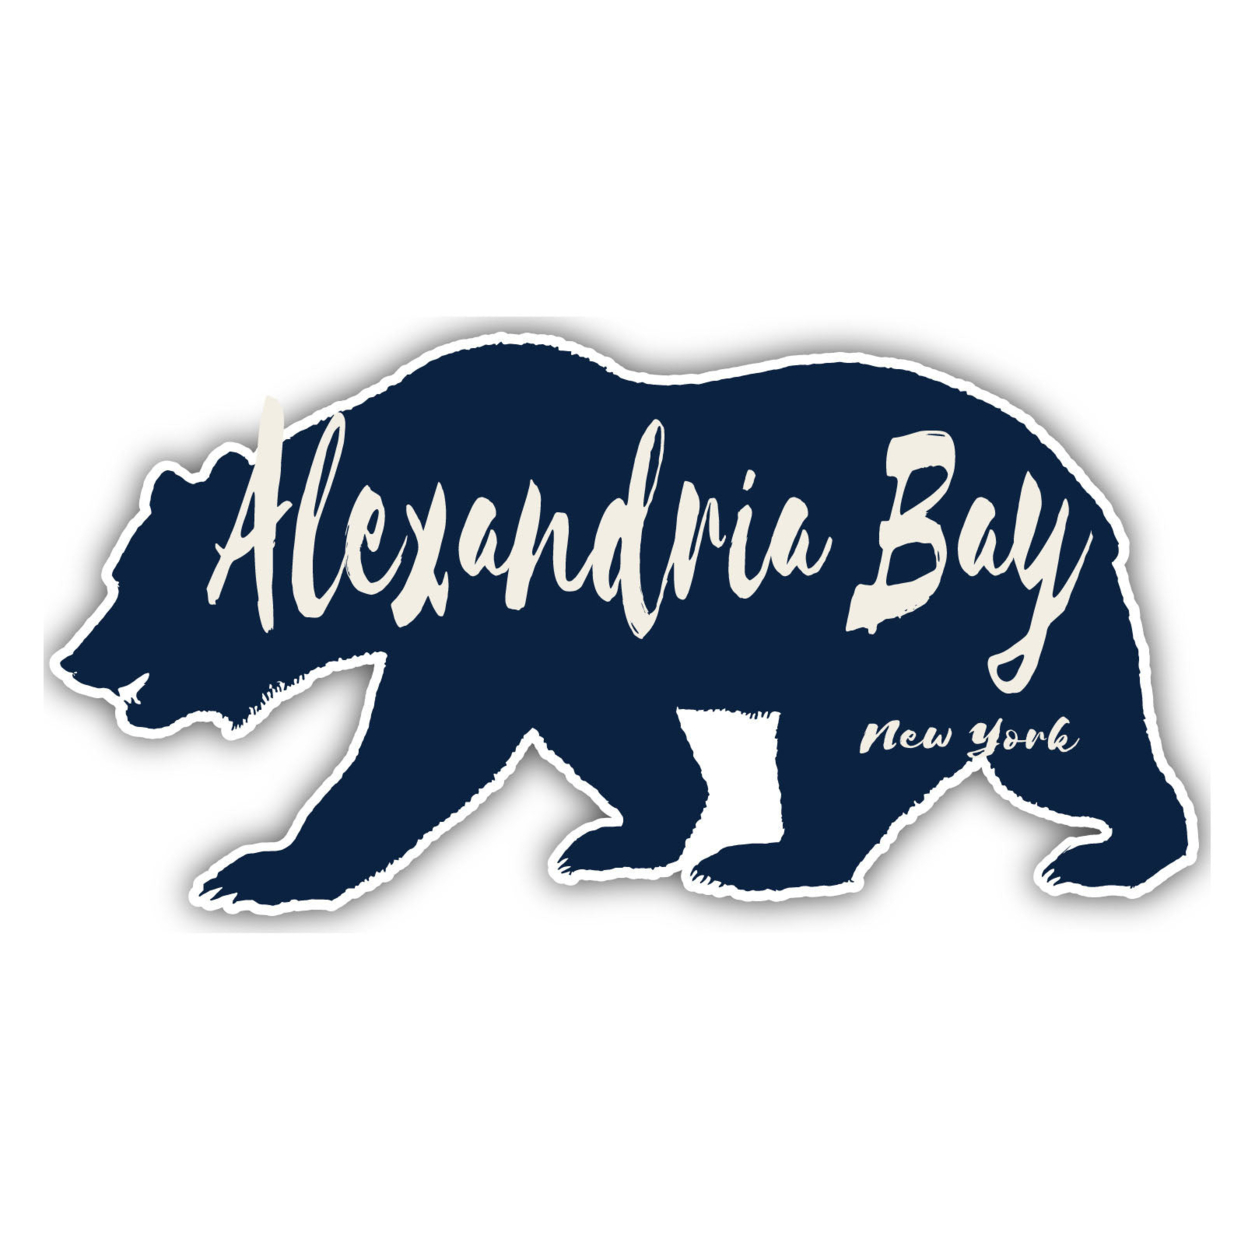 Alexandria Bay New York Souvenir Decorative Stickers (Choose Theme And Size) - 4-Pack, 10-Inch, Tent